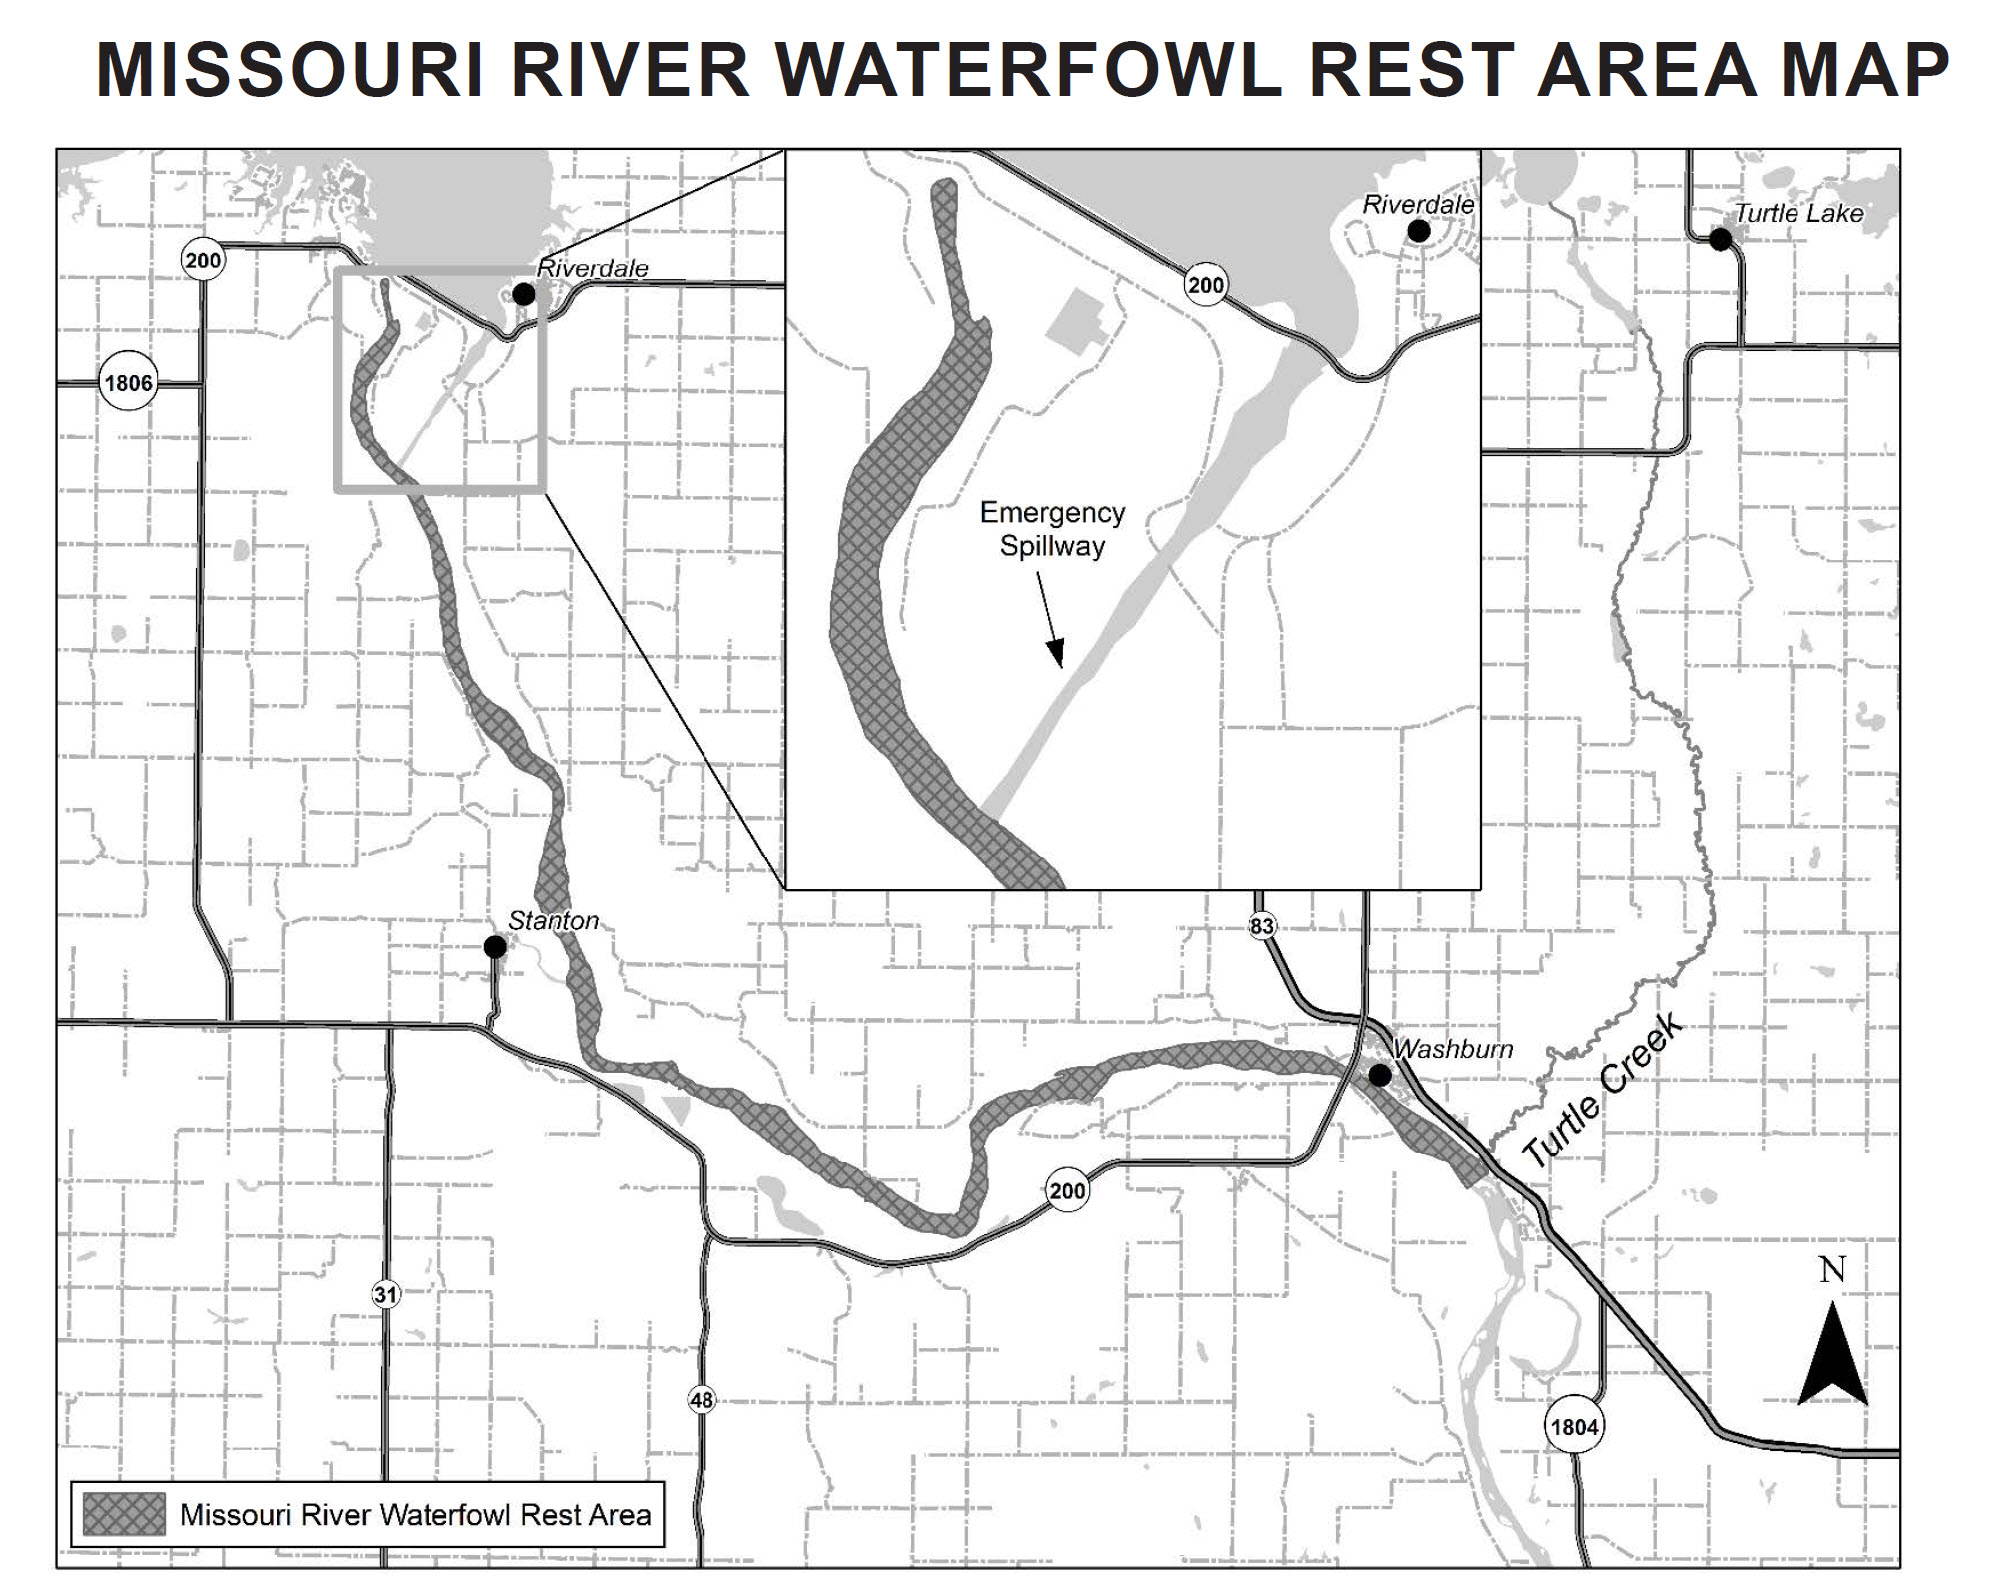 Waterfowl rest areas map - 2023 Missouri River Waterfowl Rest Area Map